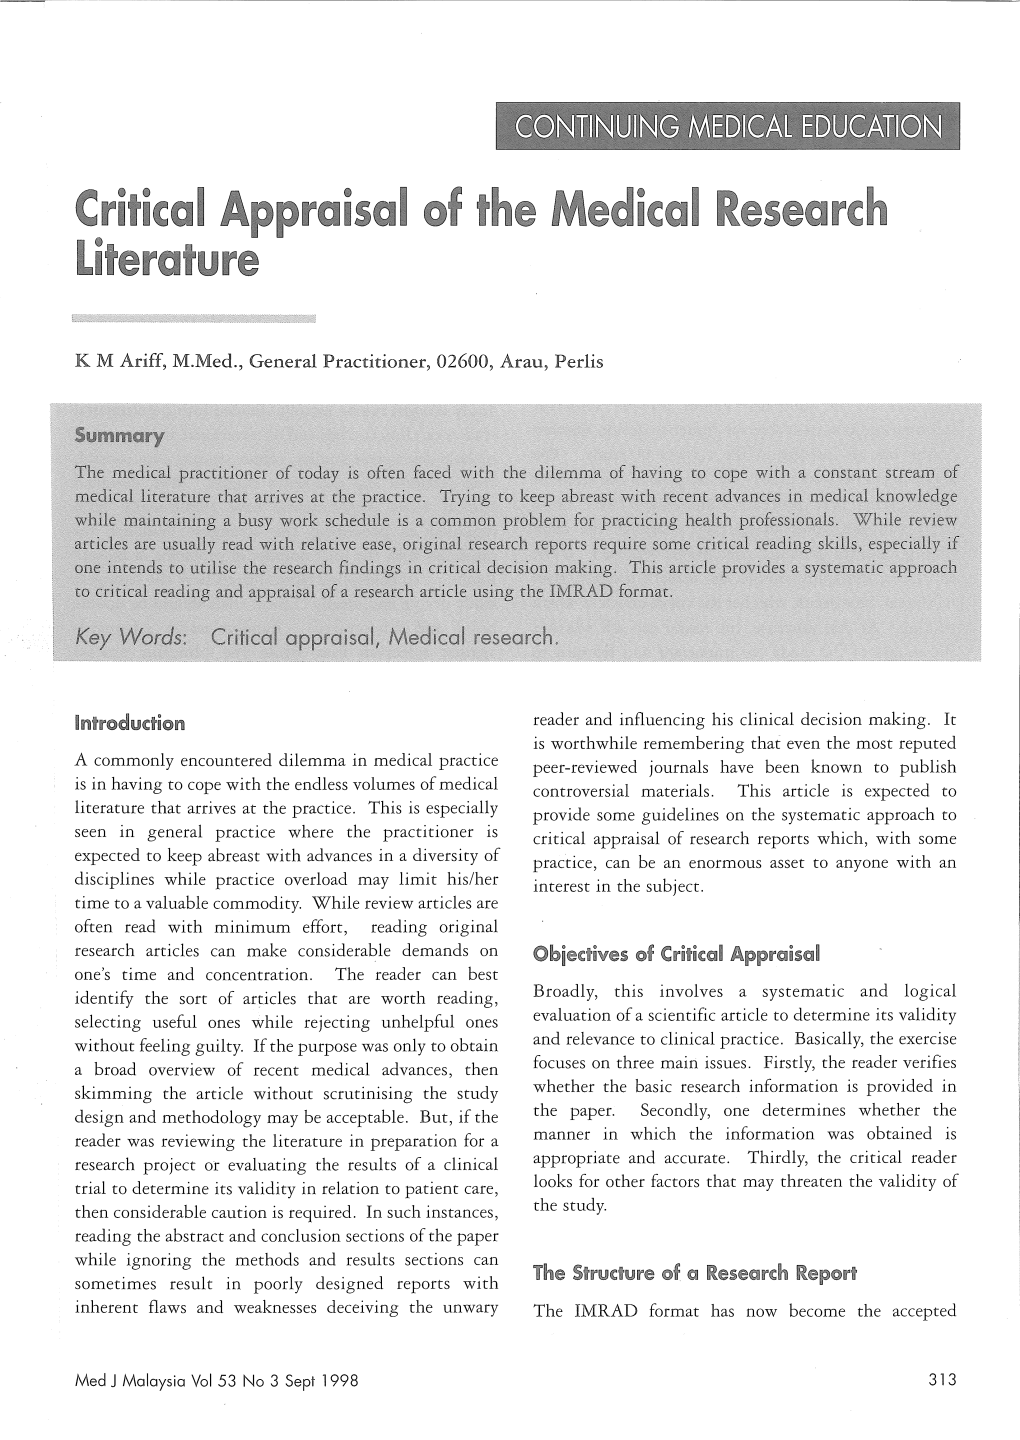 Critical Appraisal of the Medical Research Literature